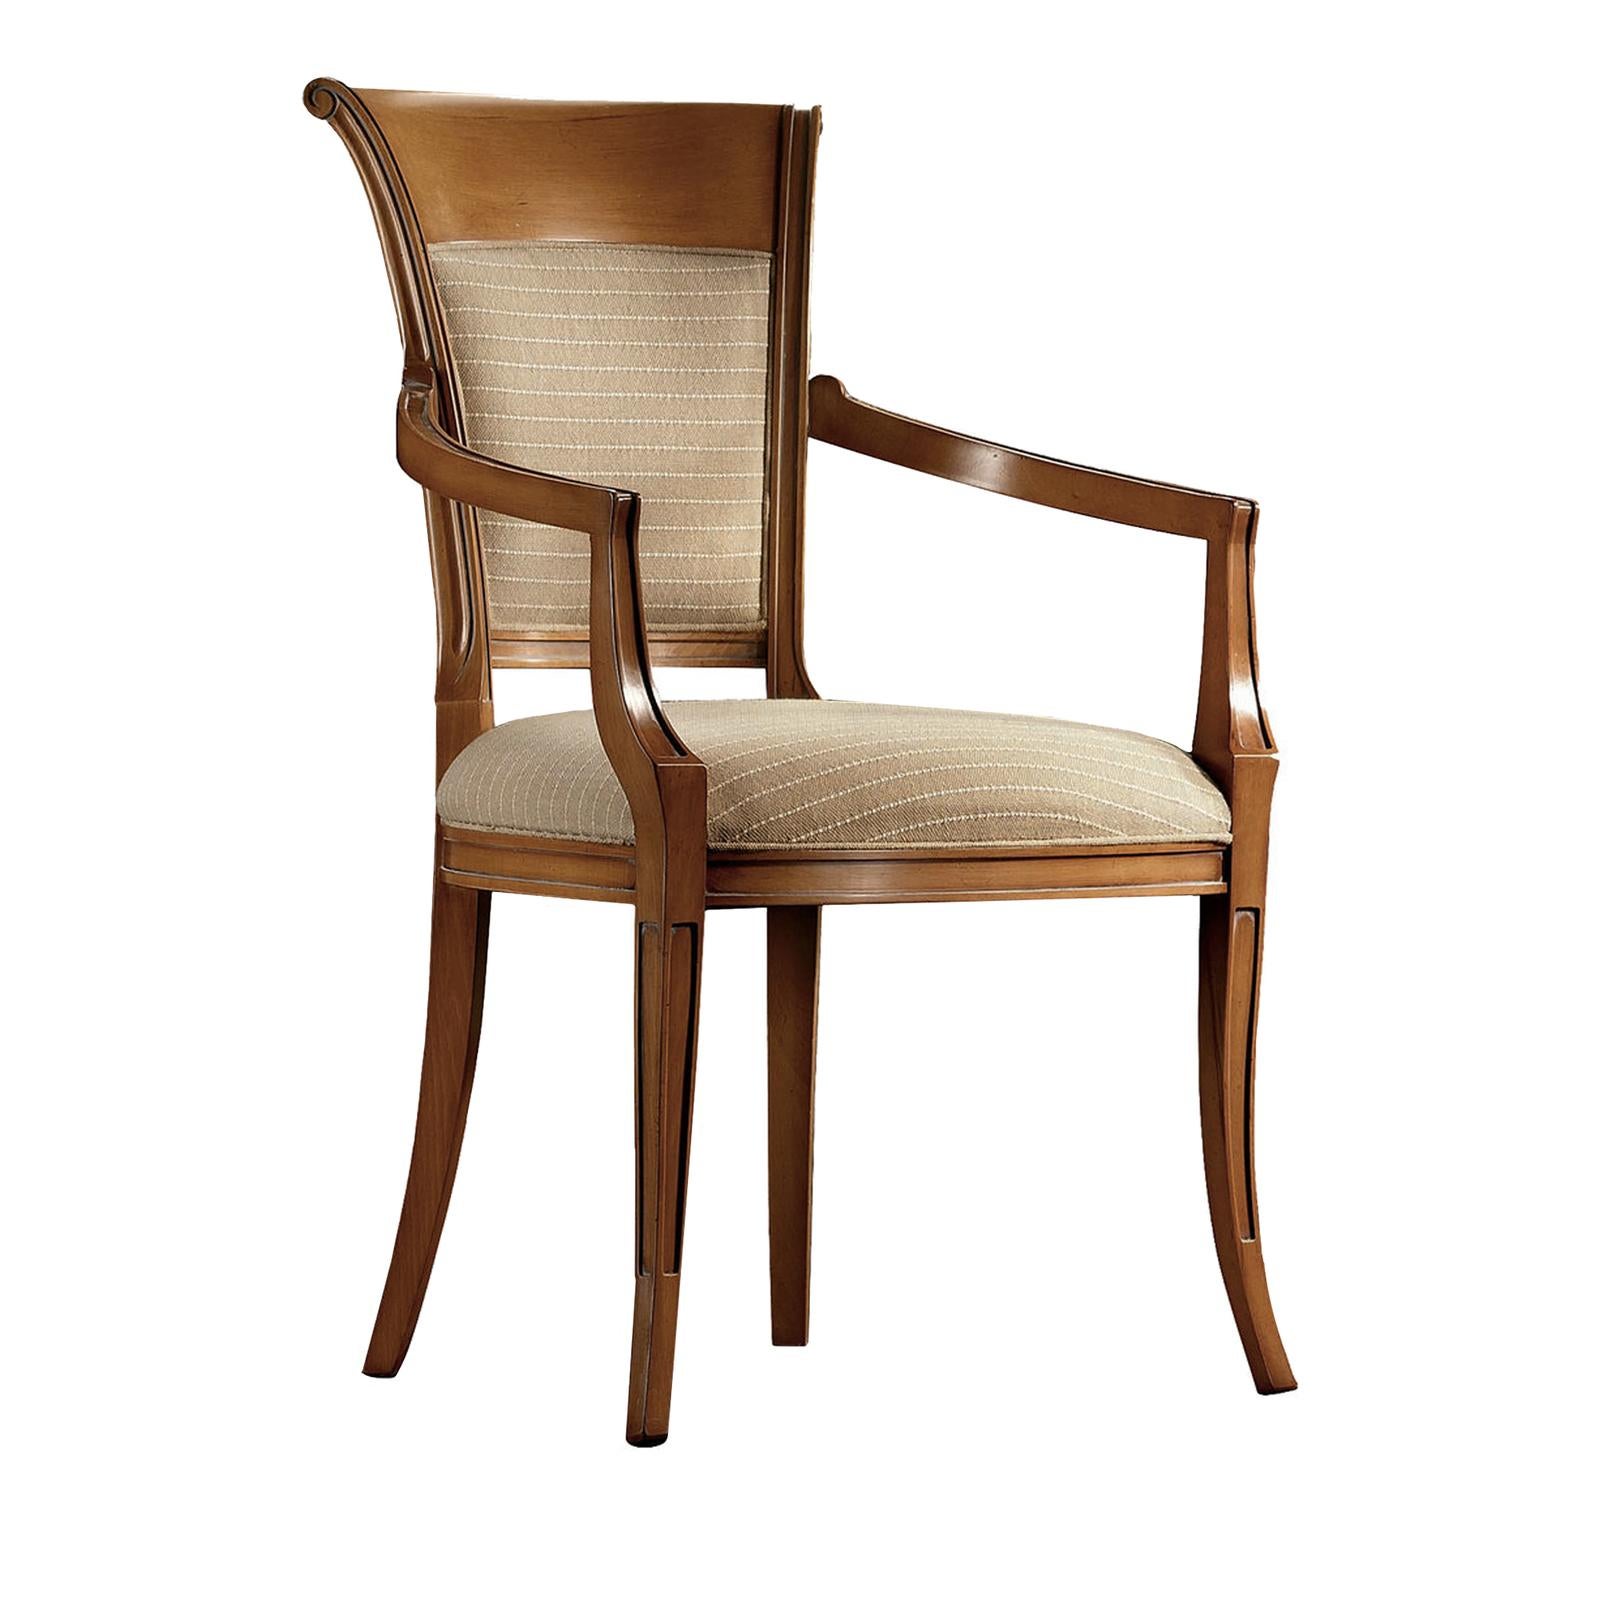 Italian Chair with Armrests #1